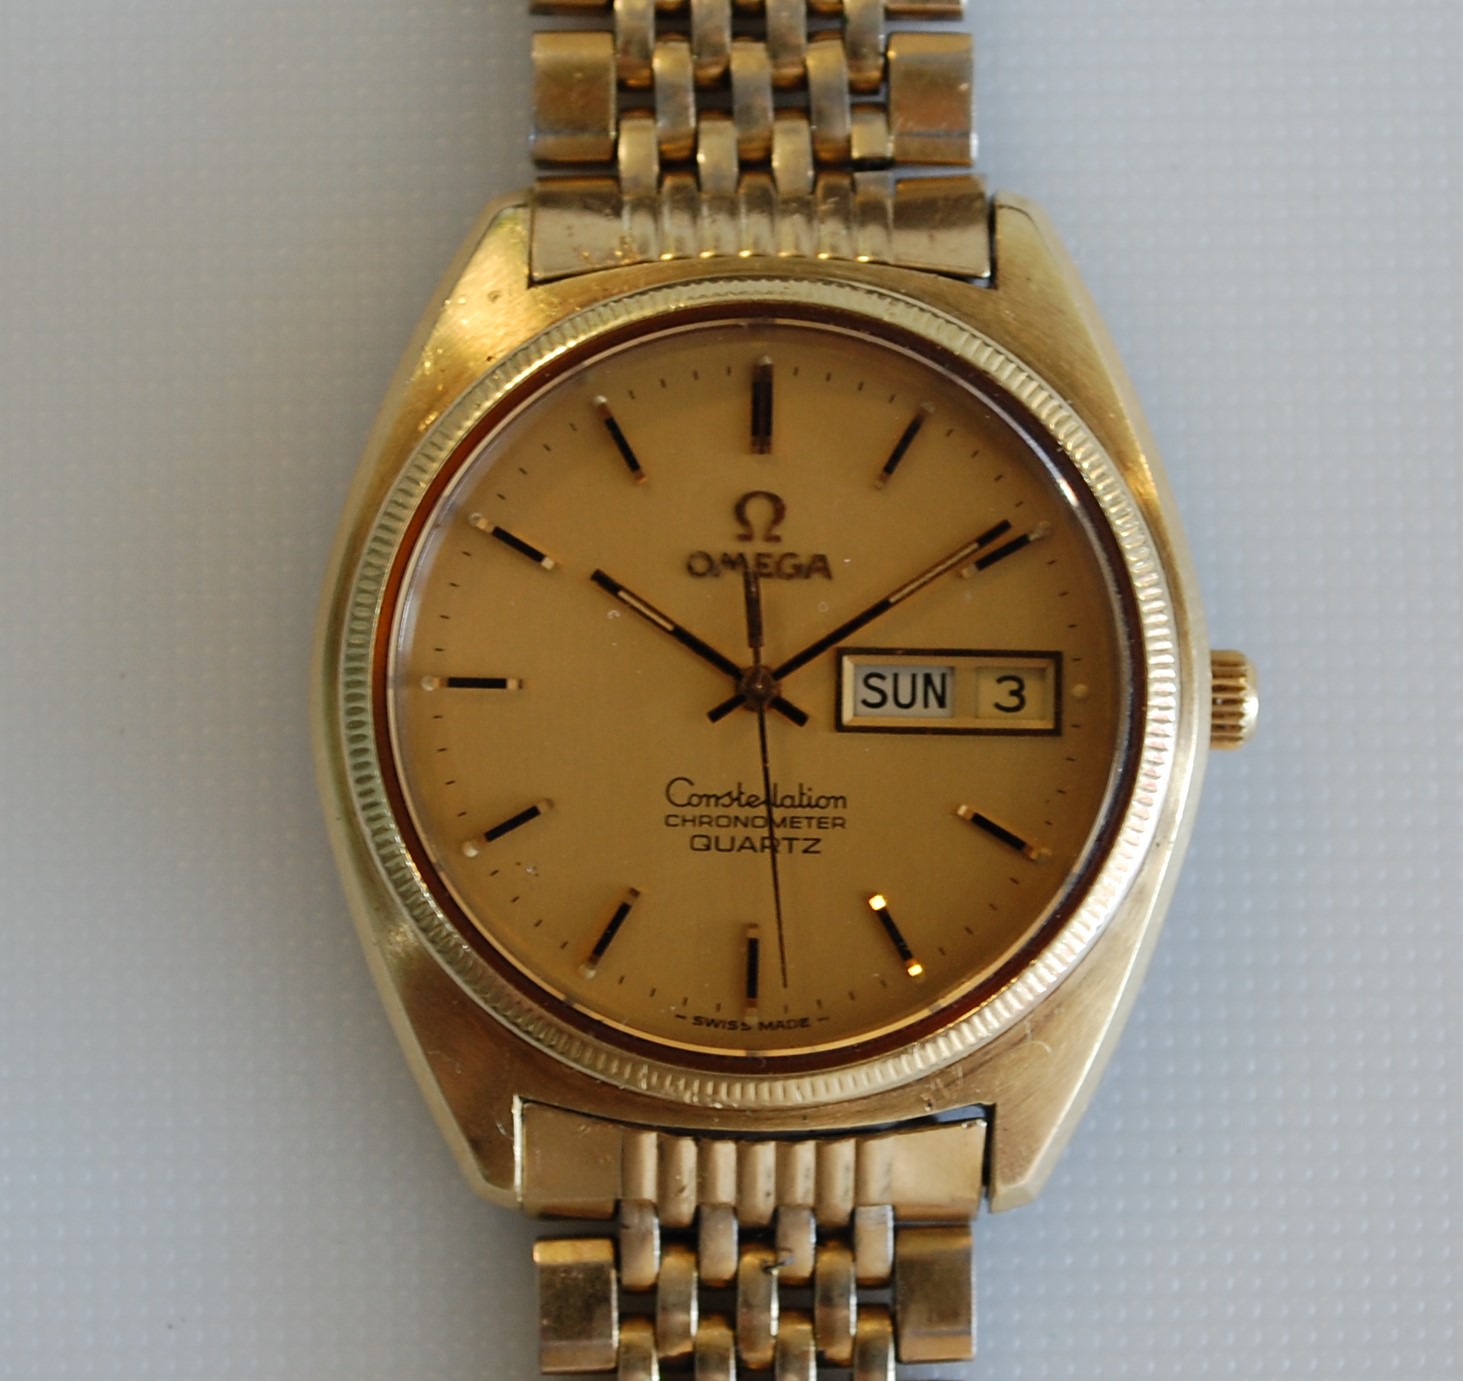 SOLD 1977 or 1982 Omega Constellation with box and papers - Birth 